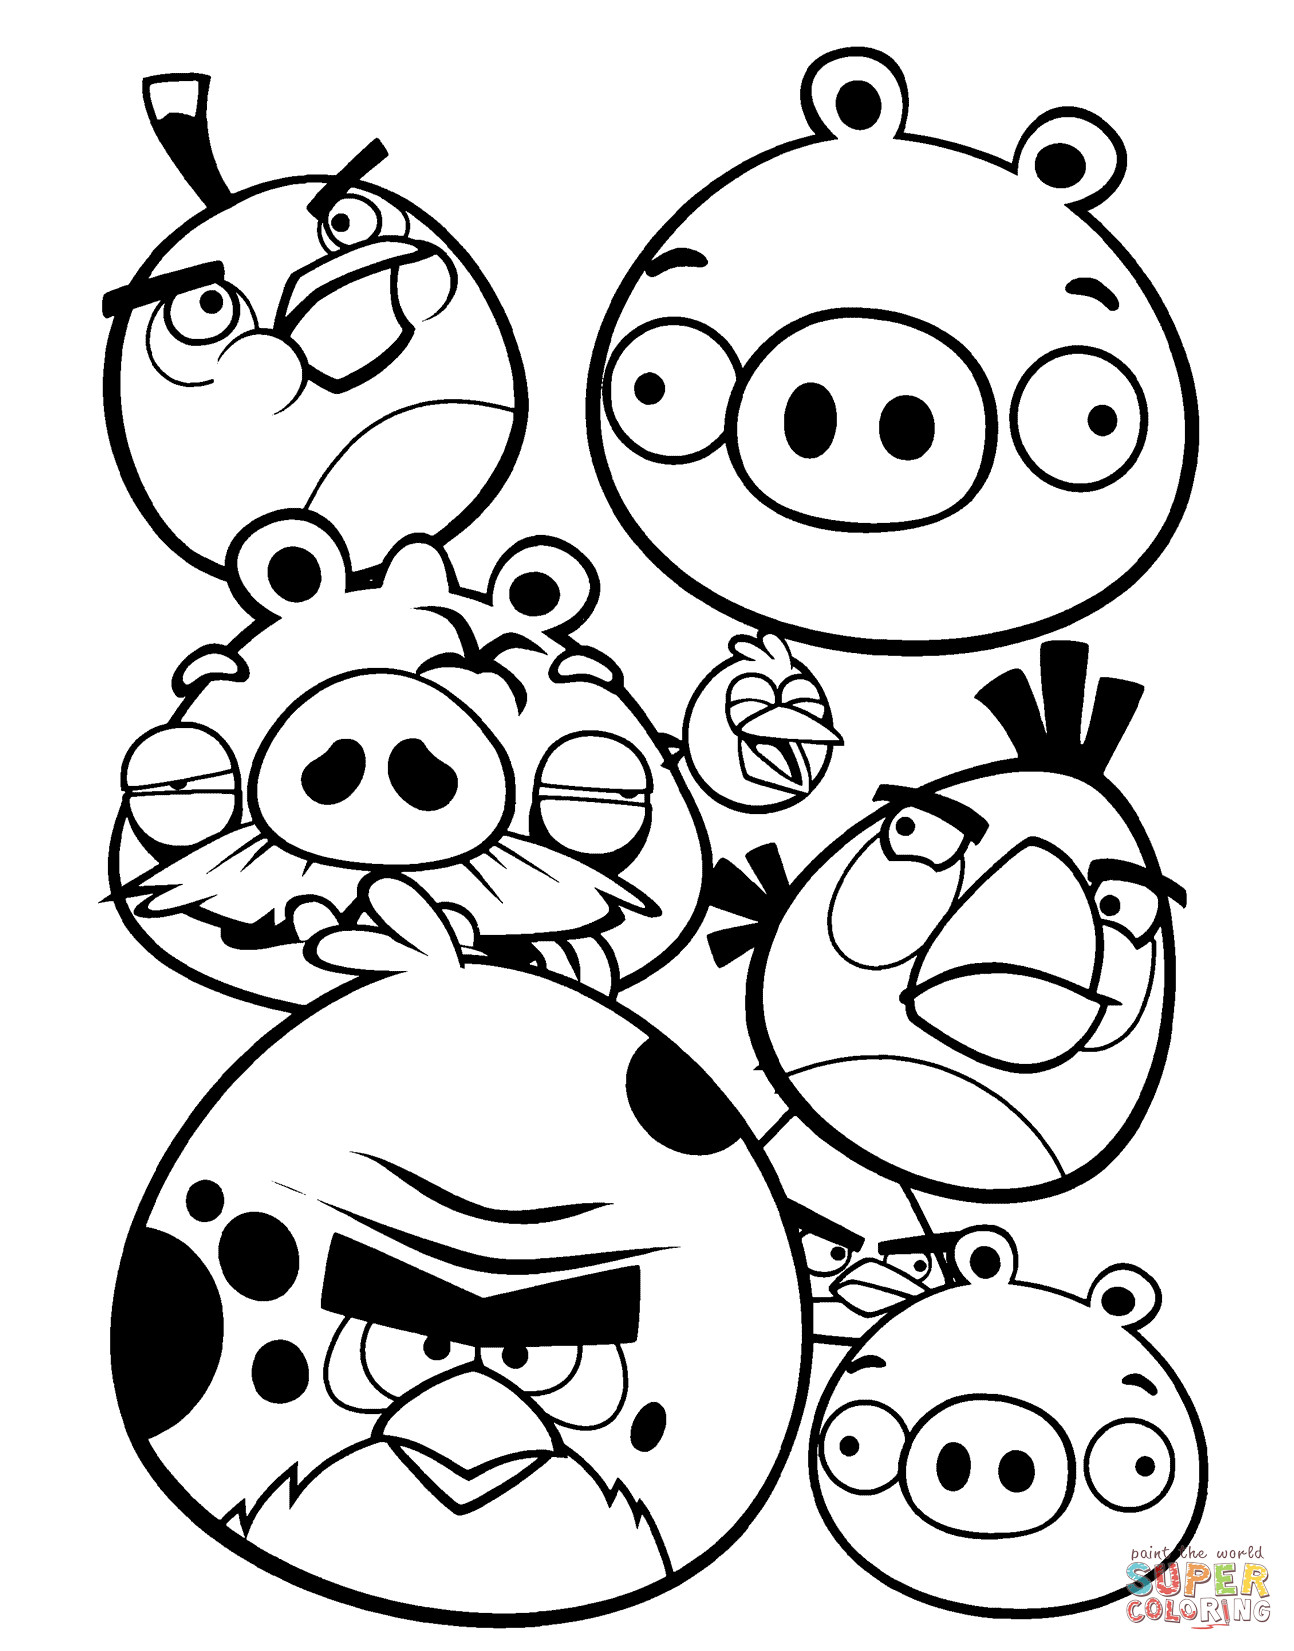 Angry Bird Printable Coloring Pages
 15 Best Printable Angry Birds Colouring Pages for Kids